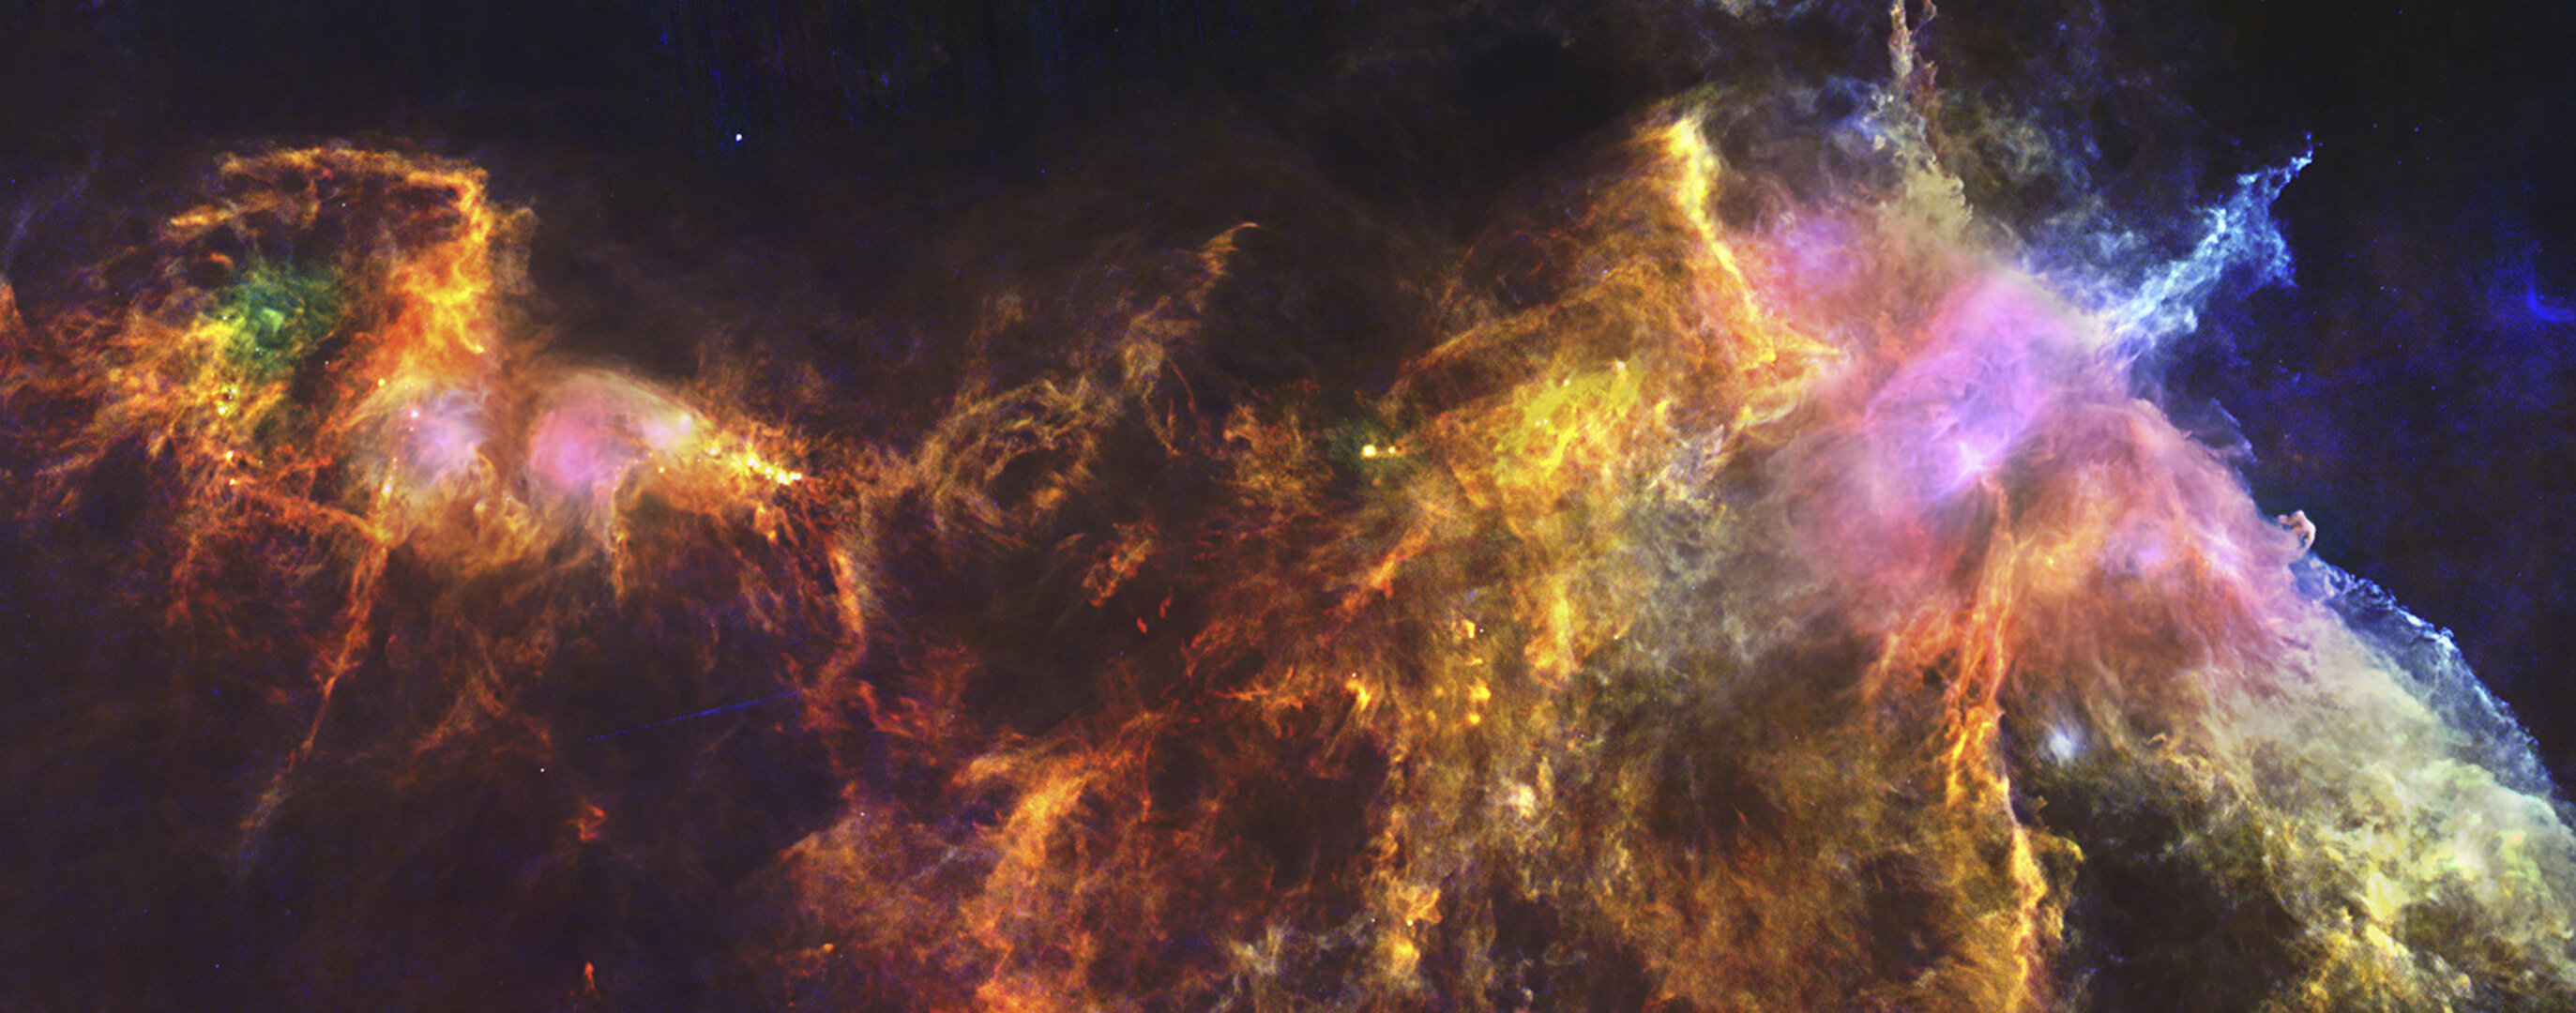 Herschel’s view of the Horsehead Nebula and surrounds